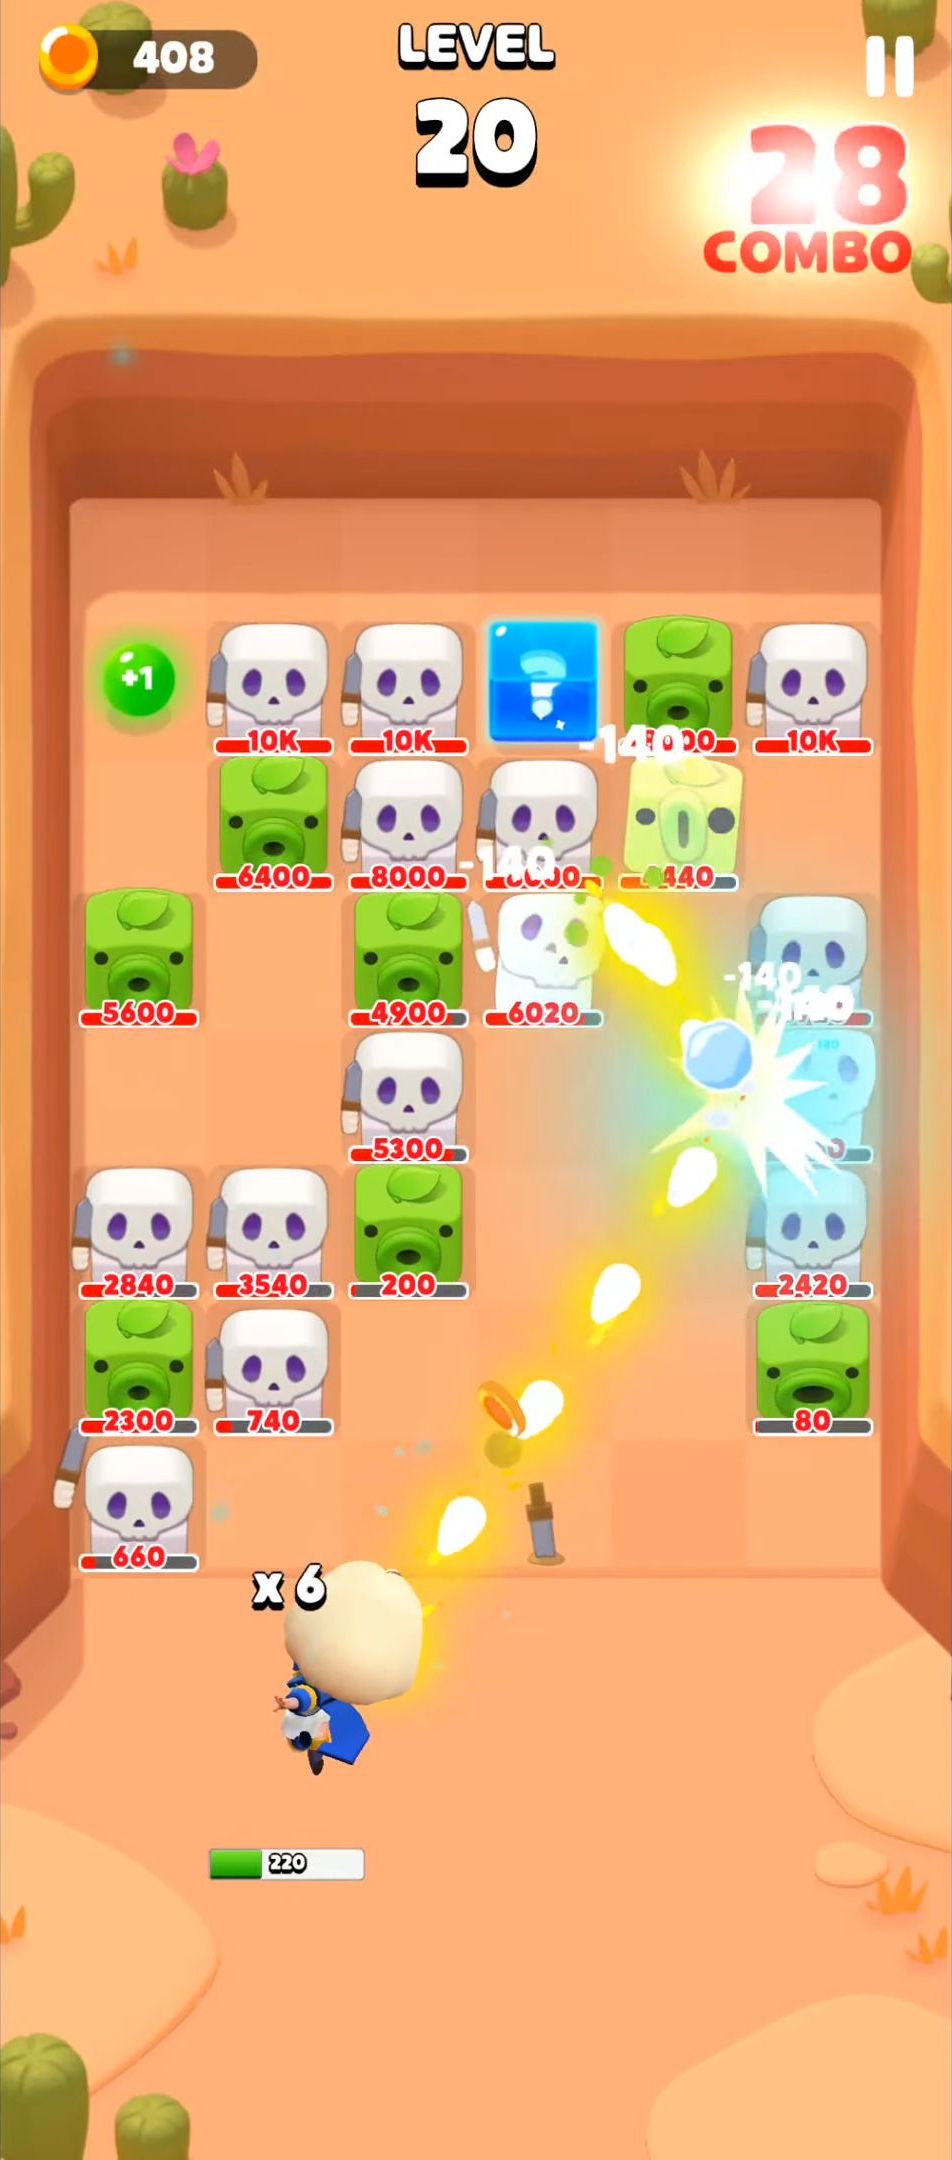 Gameplay of the PunBall for Android phone or tablet.